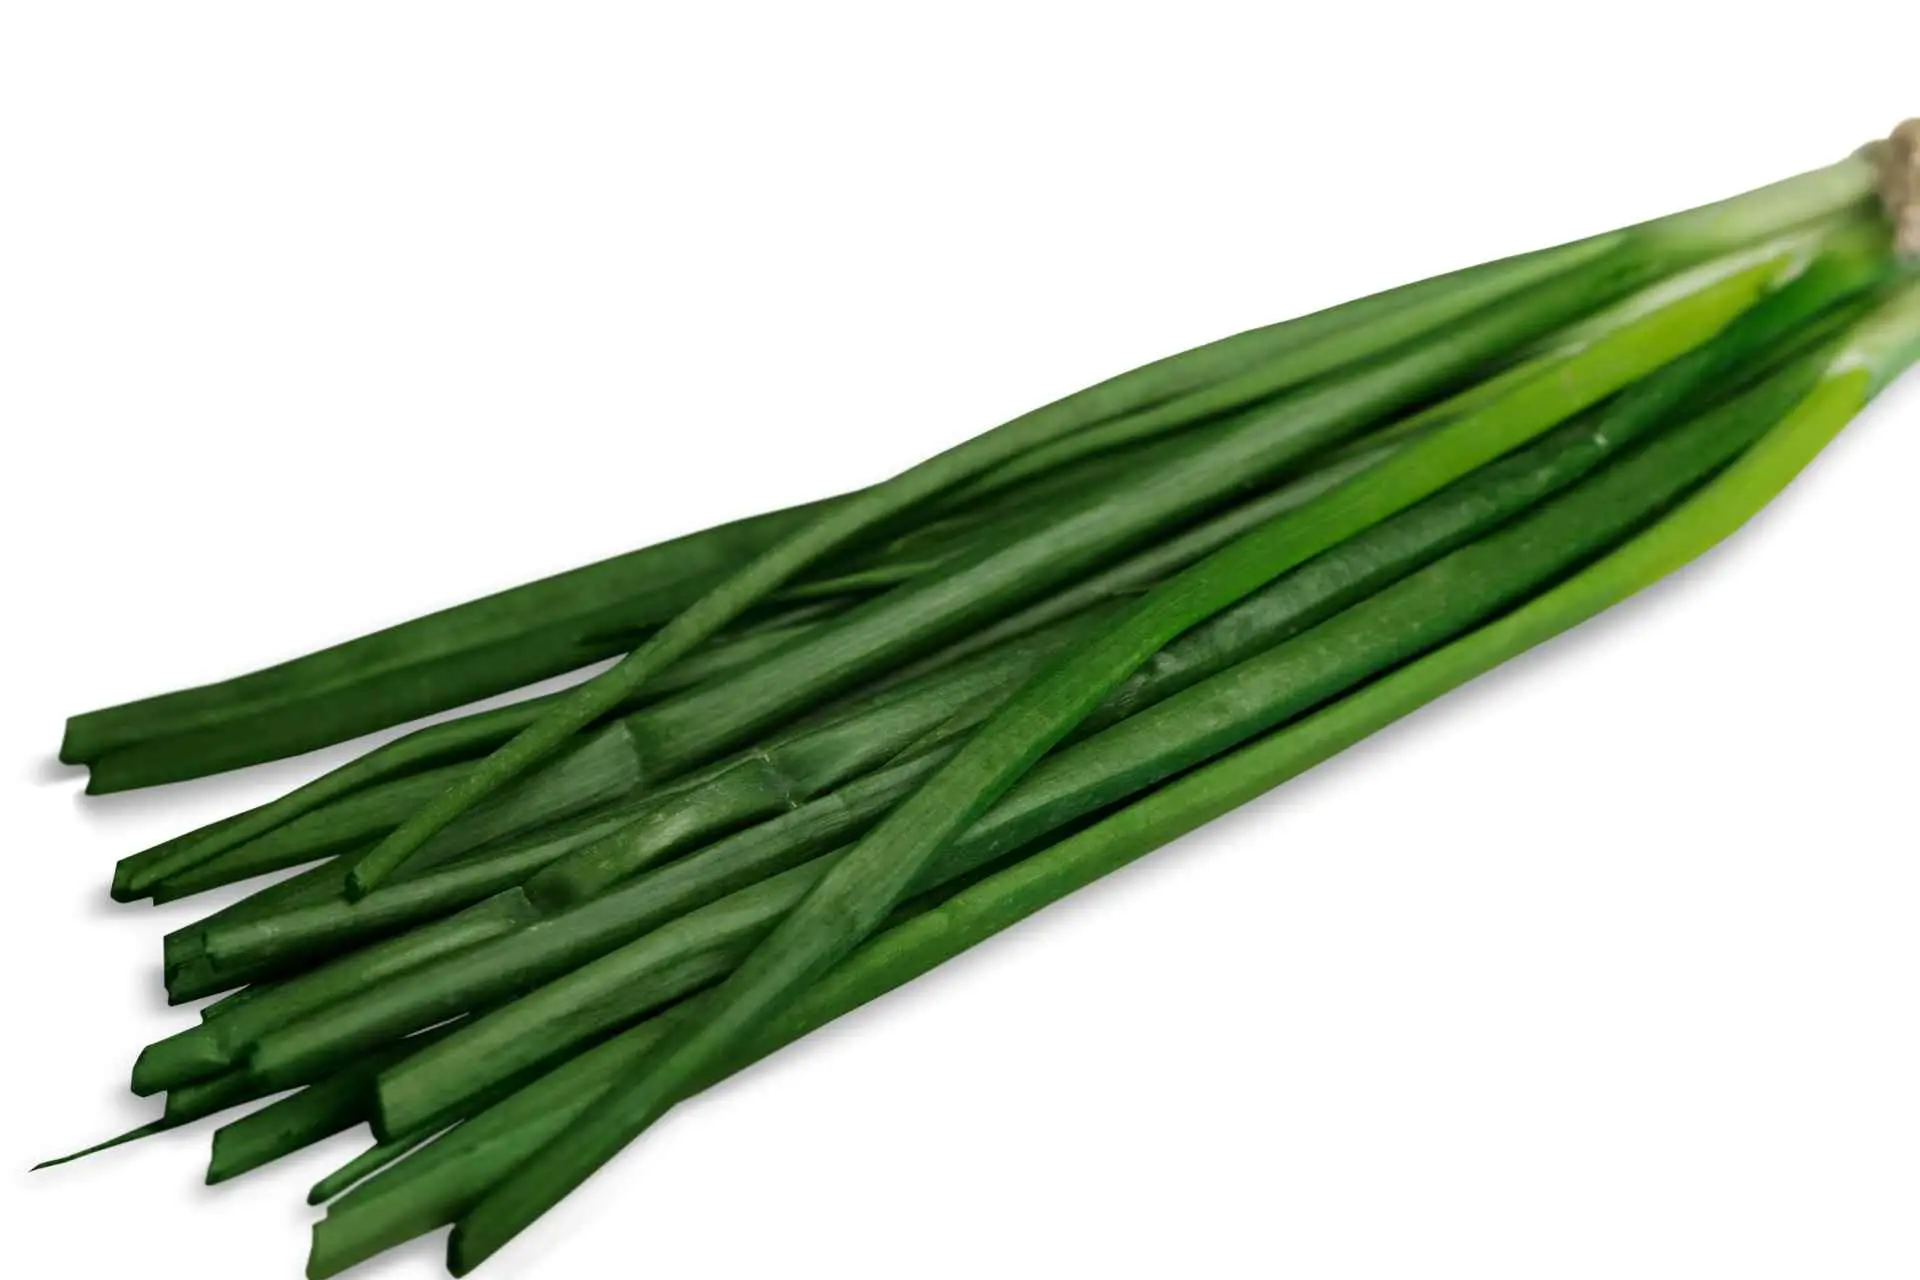 12 Major Benefits of Chives